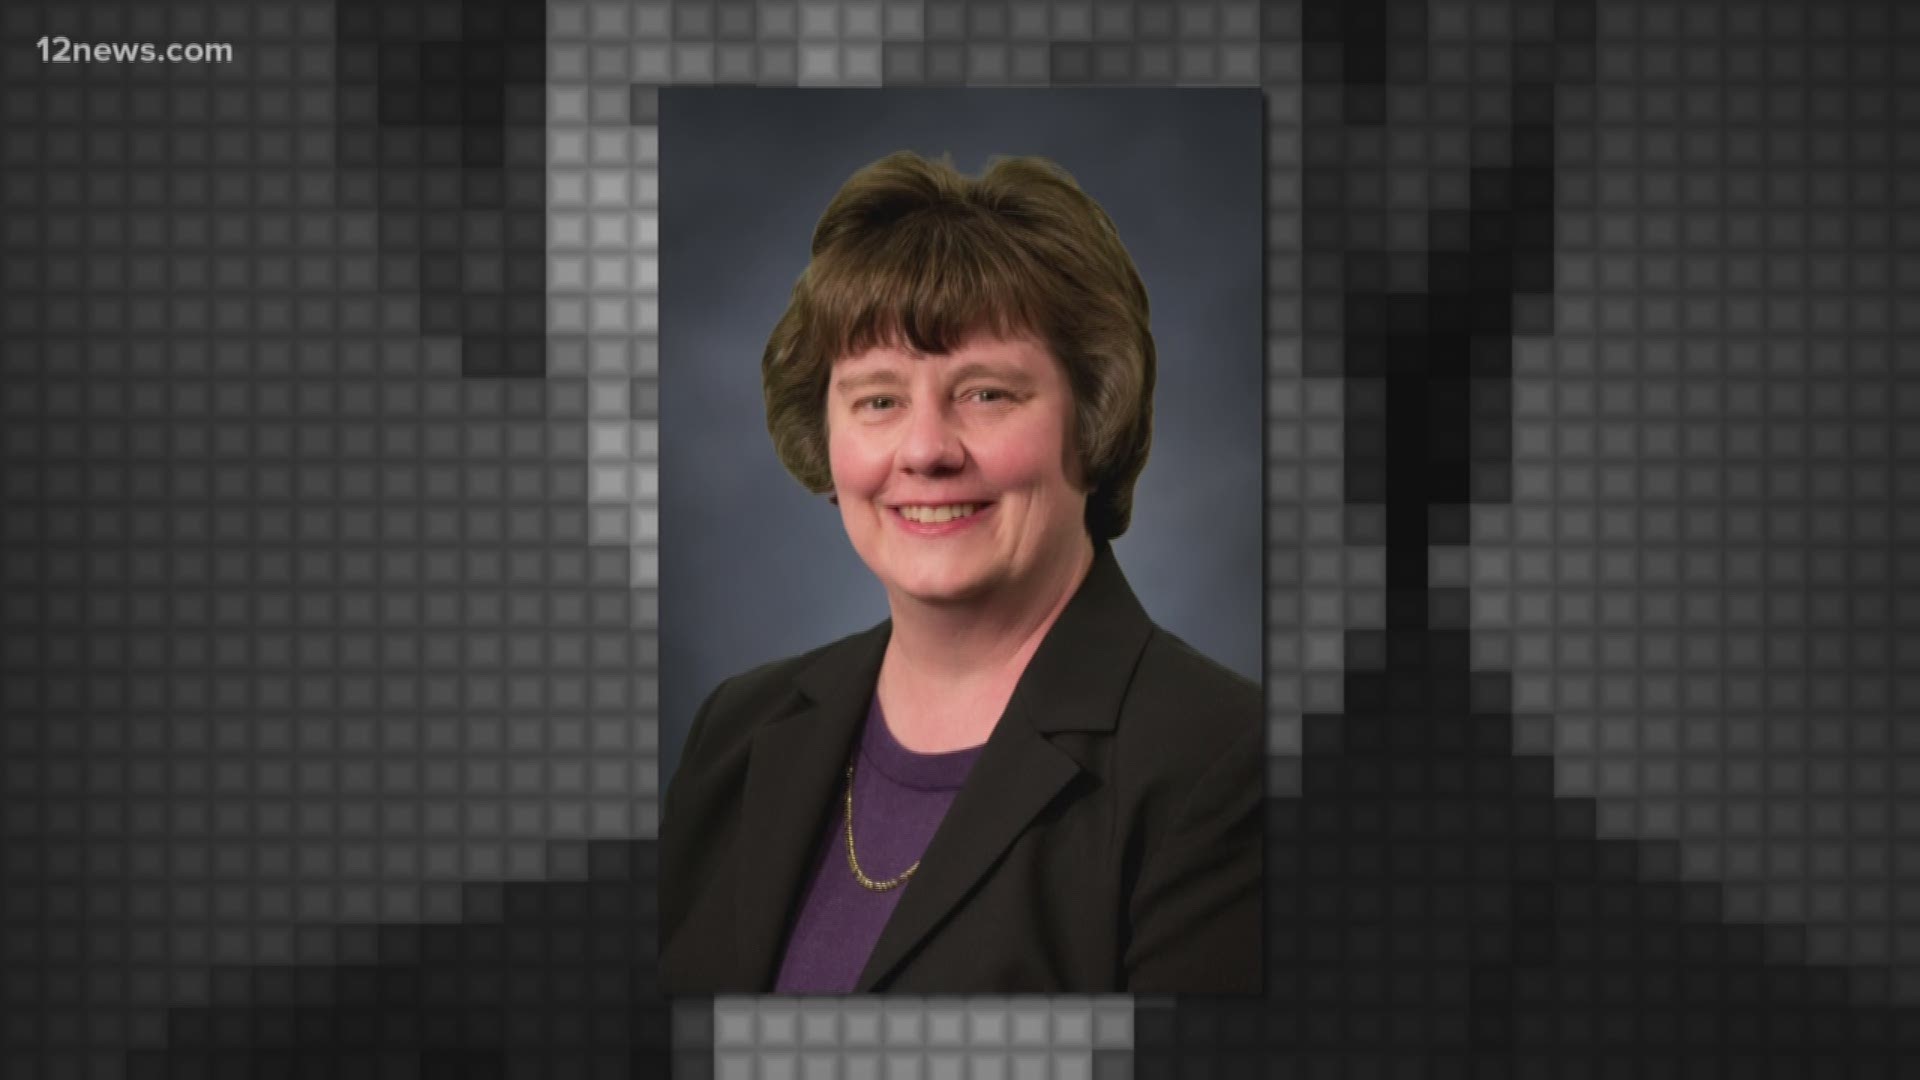 At the center of the Kavanaugh hearings is Maricopa County prosecutor and chief of the sex crimes division, Rachel Mitchell. She will question accuser, Christine Blasey Ford and the accused, Brett Kavanaugh.